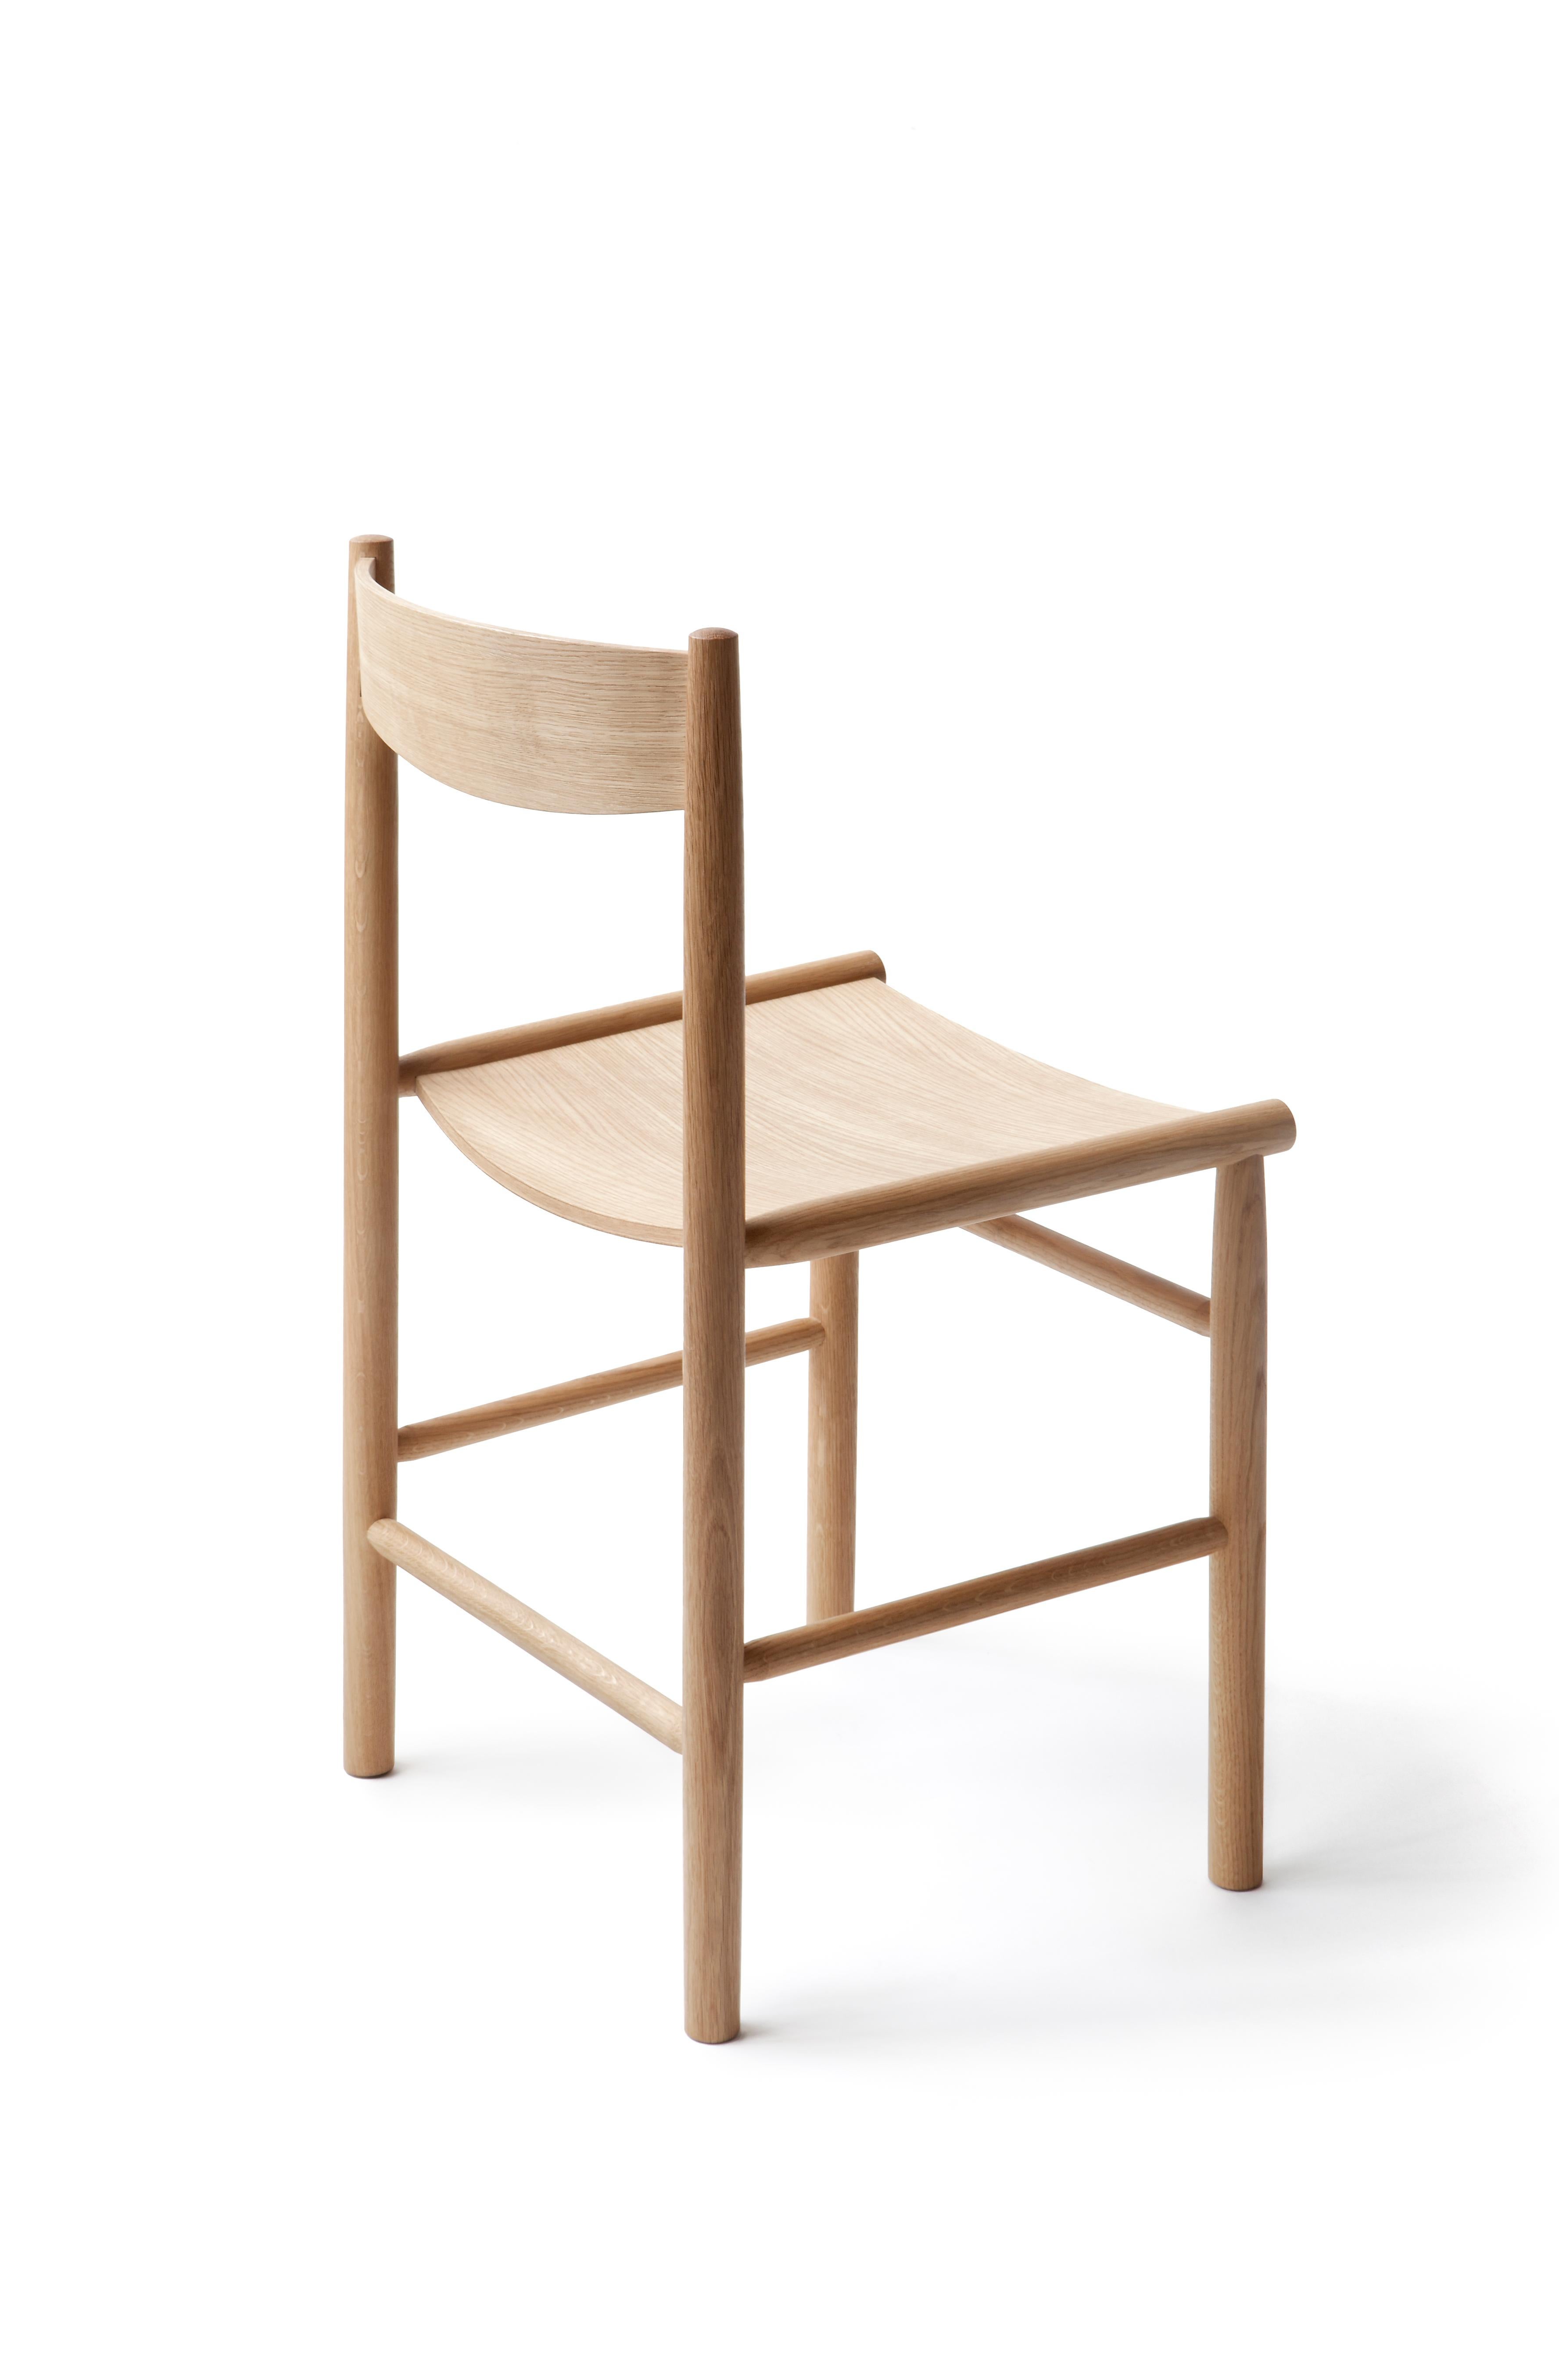 The light Akademia chair is designed by Wesley Walters and Salla Luhtasela in 2019. As the name suggests, the Akademia chair was the result of Wesley Walter’s Master’s Thesis work at Aalto University, Helsinki. The young designer, one half of the